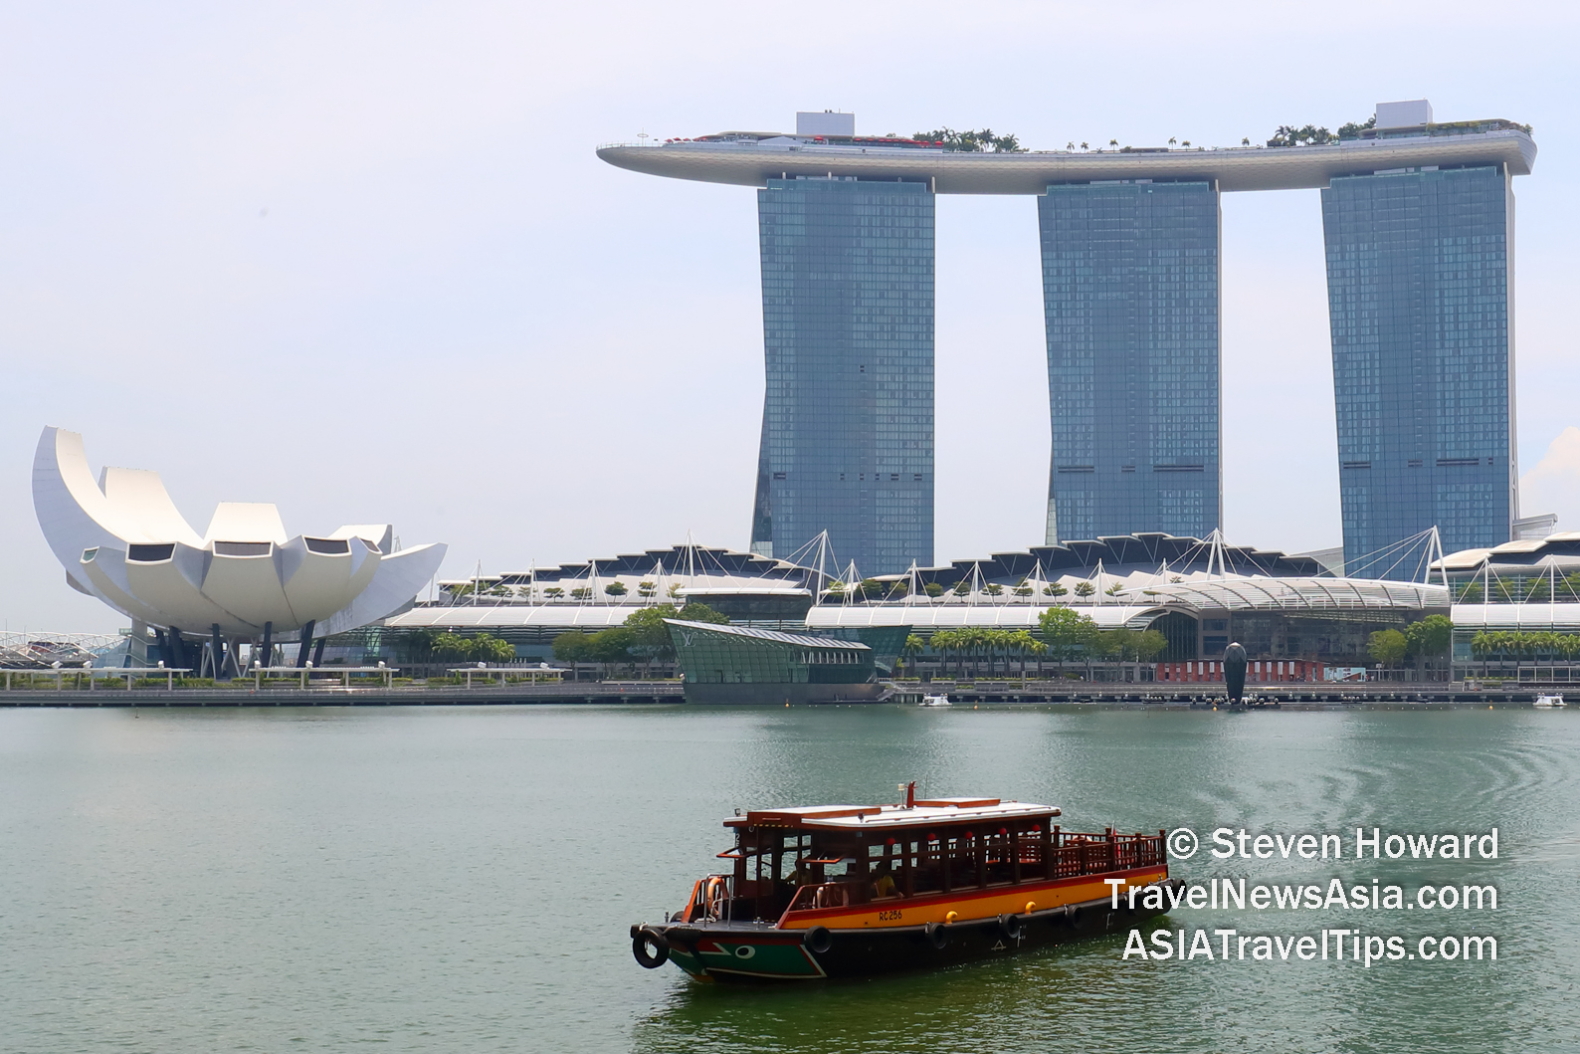 Marina Bay Sands. Picture by Steven Howard of TravelNewsAsia.com Click to enlarge.